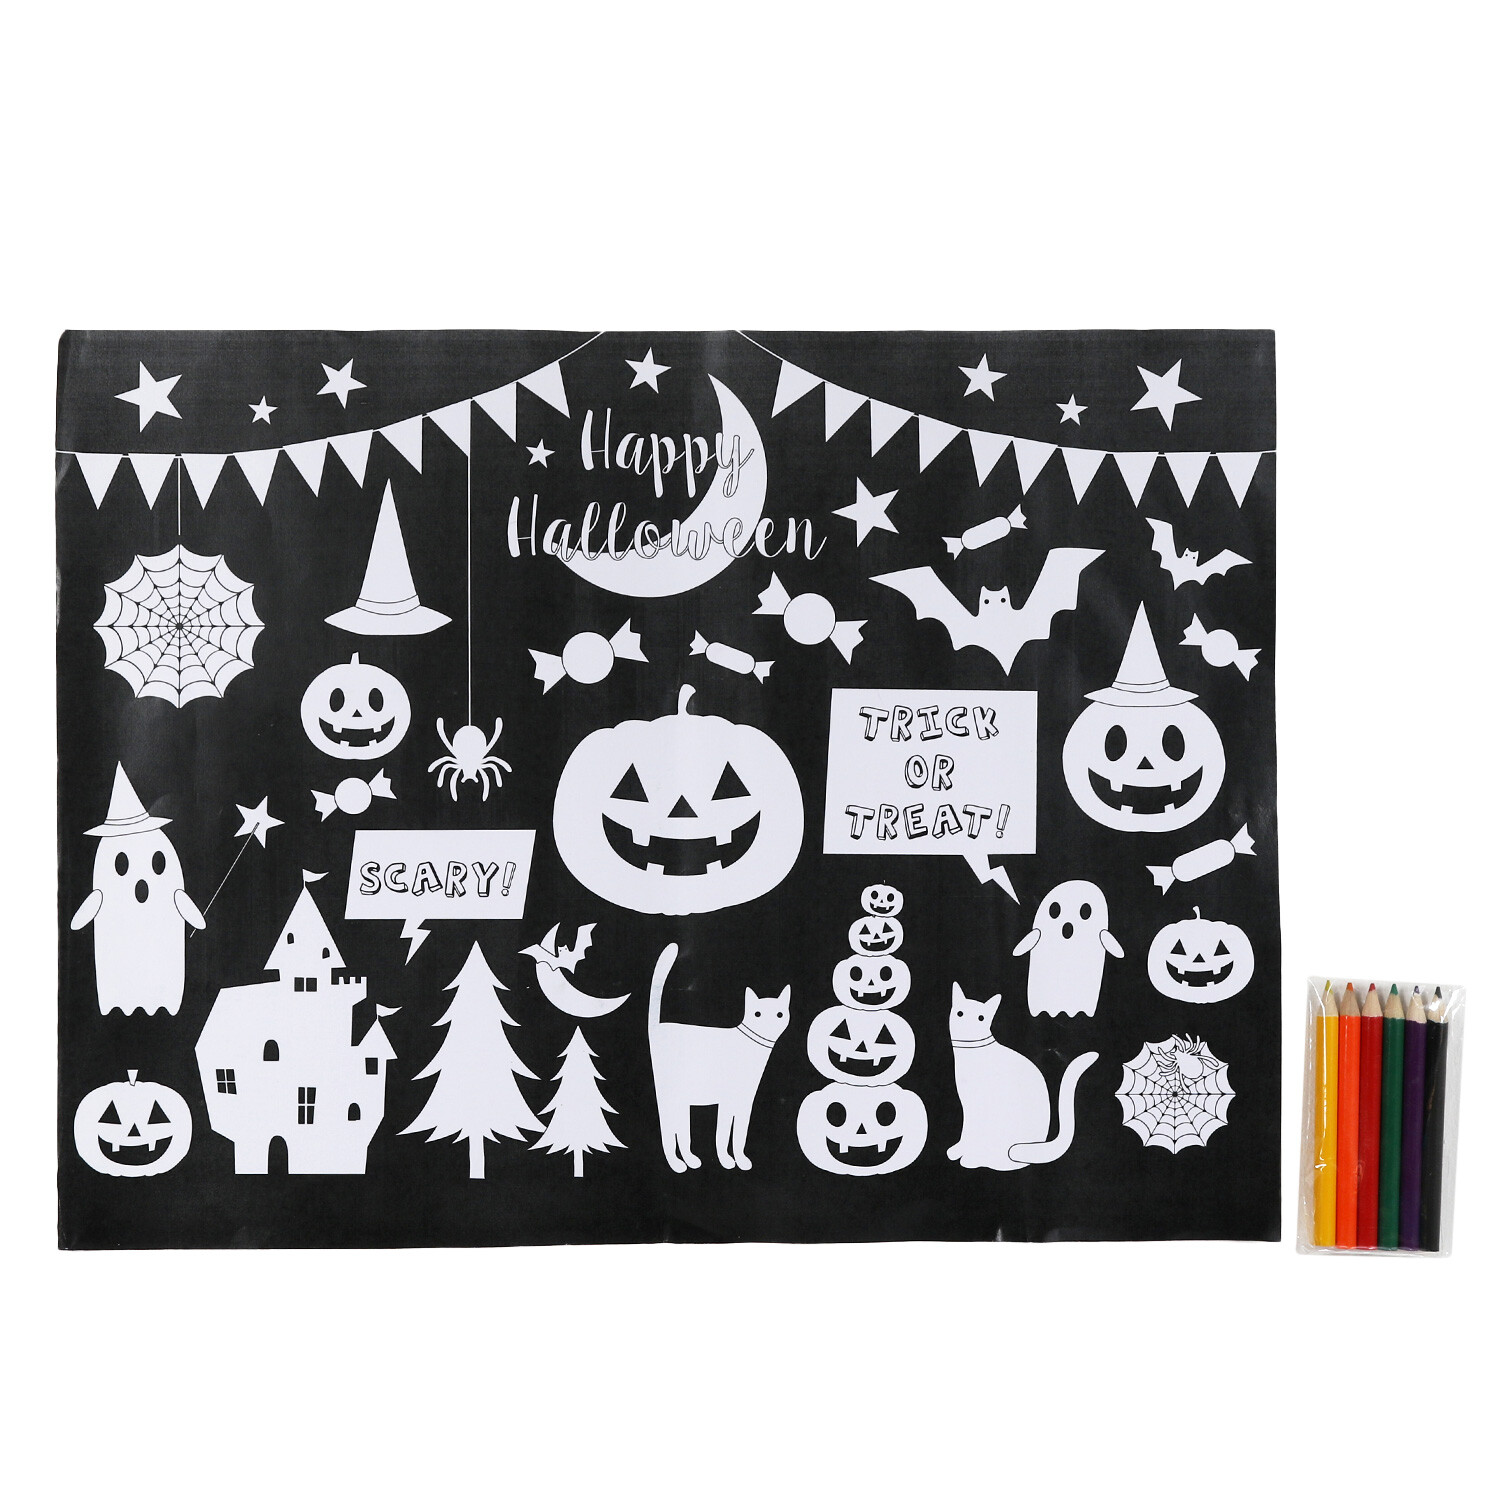 Colour Your Own Halloween Placemats Image